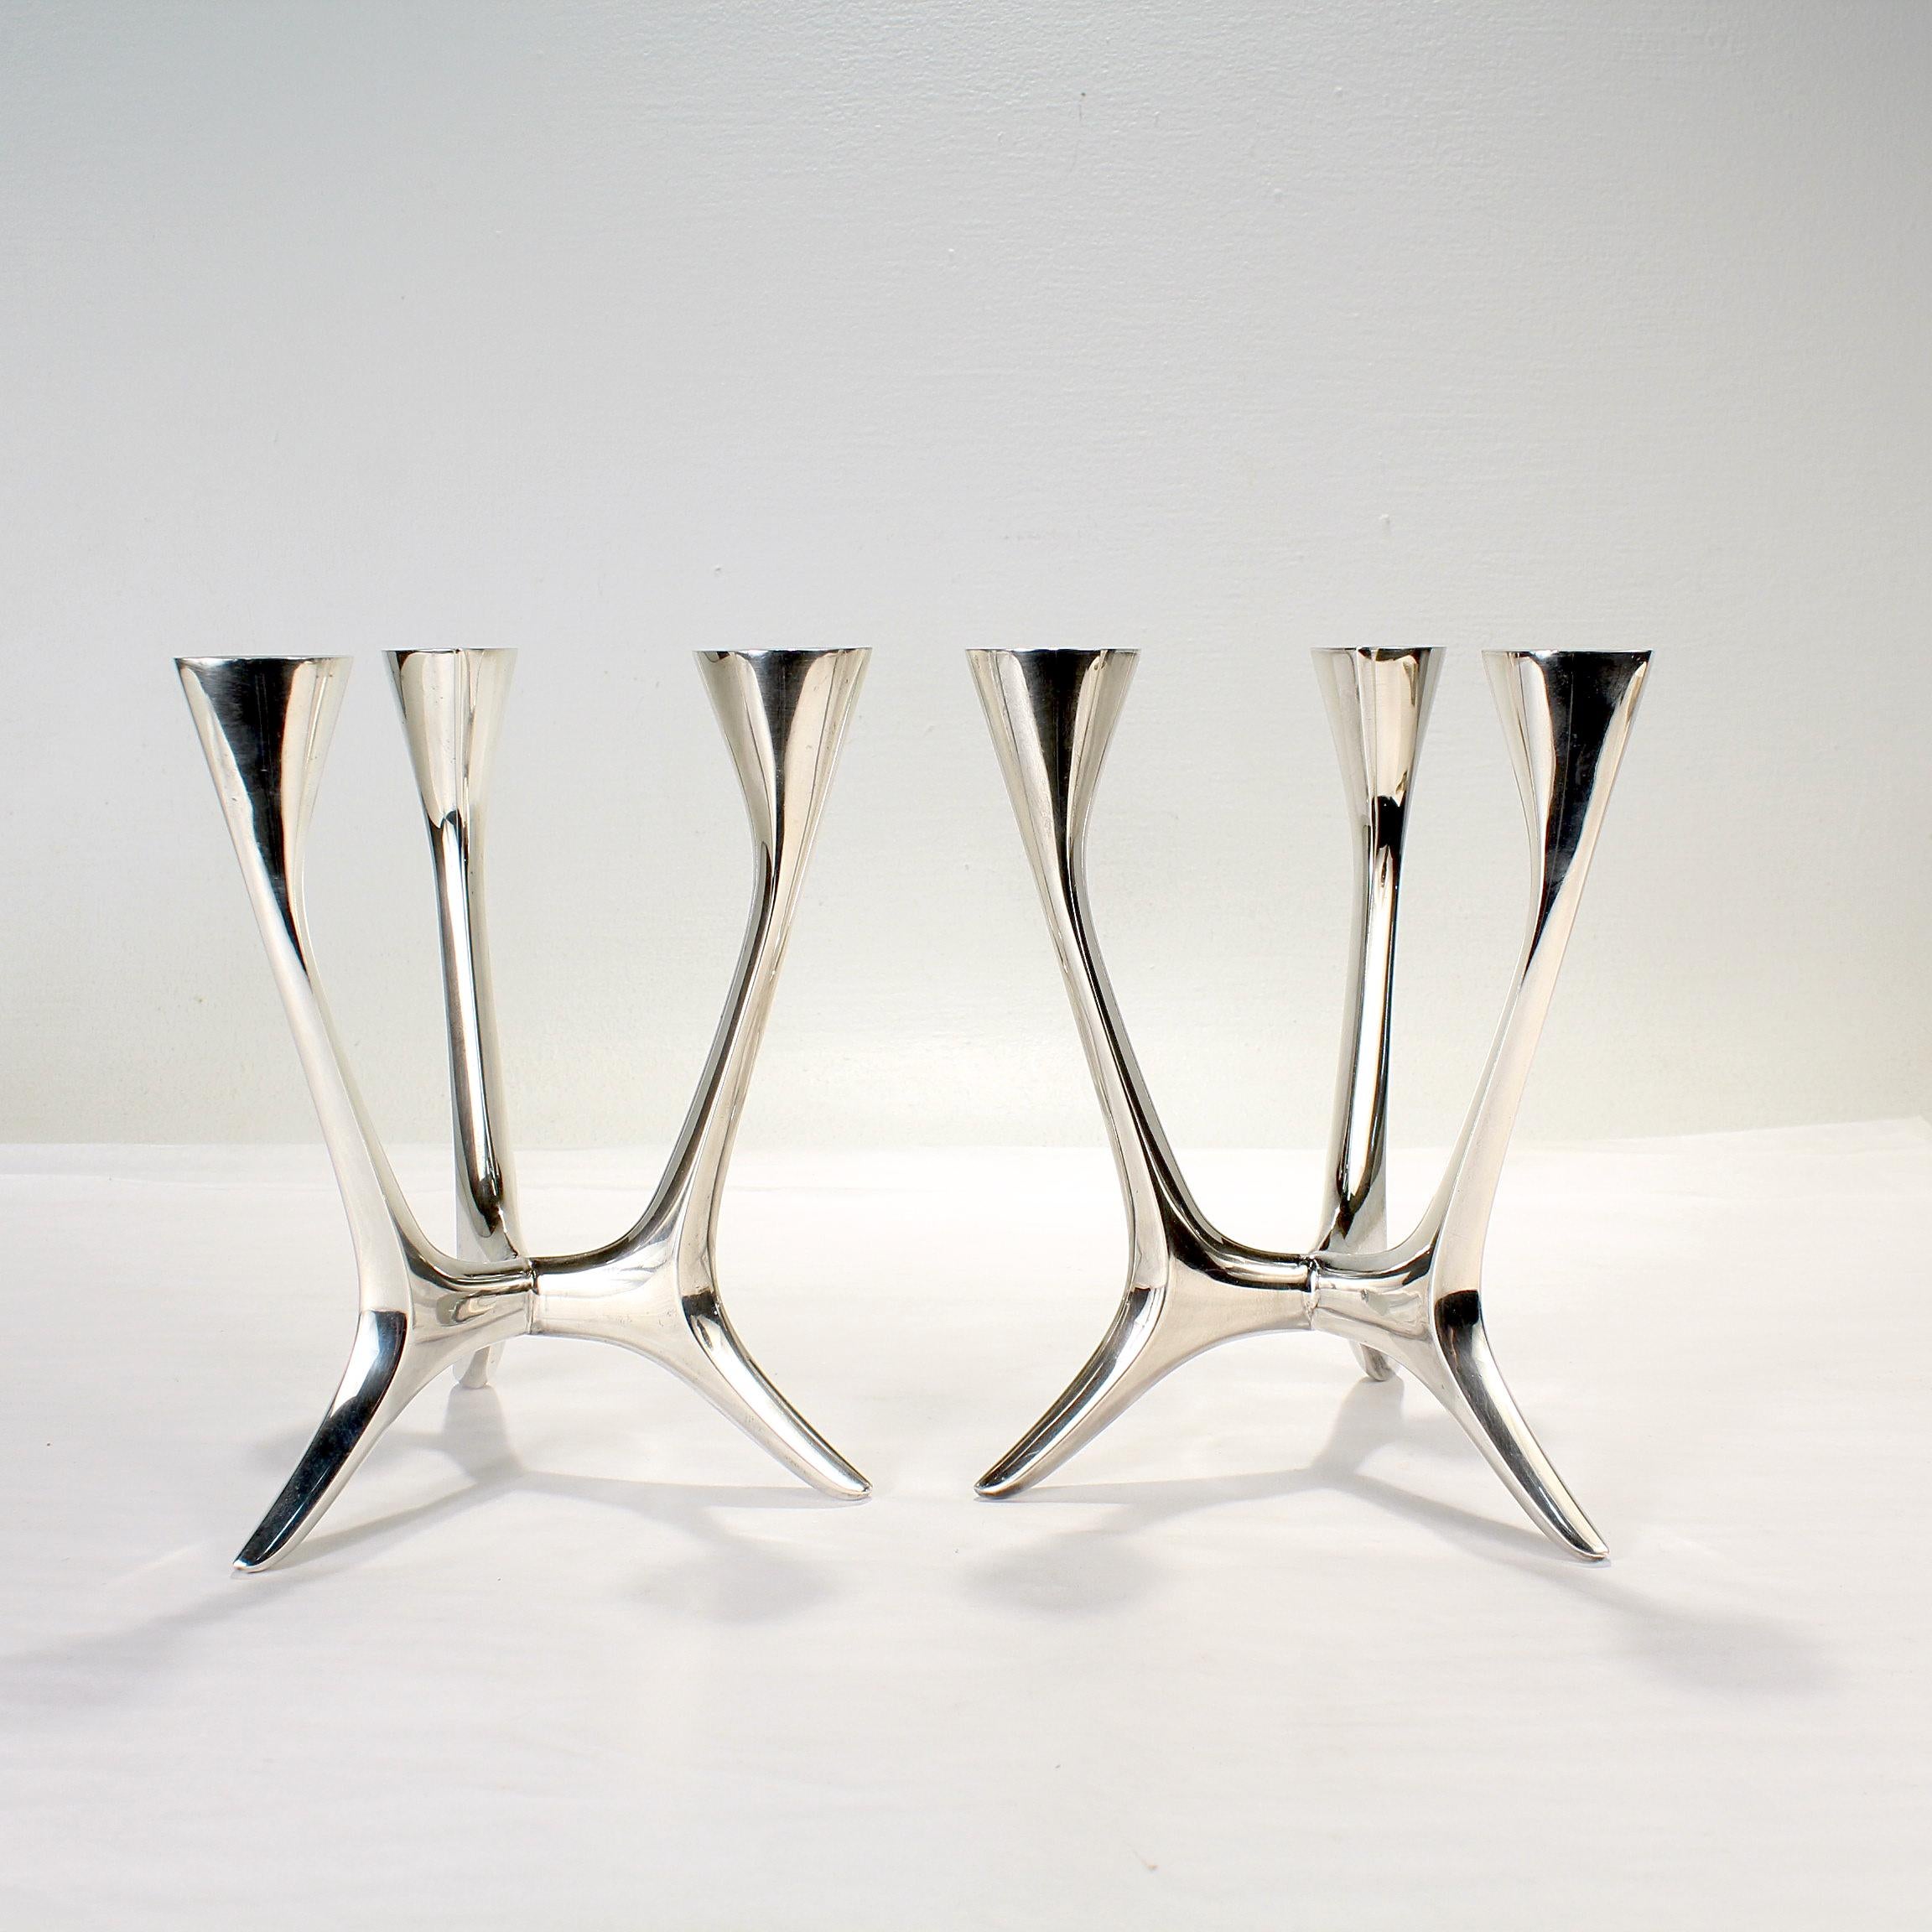 A fine pair of German Mid Century modern three-light candelabra.

By M.H. Wilkens and Söhne. 

Each consisting of 3 joined arms supported by a flaring base and terminate in oval or navette shaped flaring candle cups. 

Simply wonderful Modernist